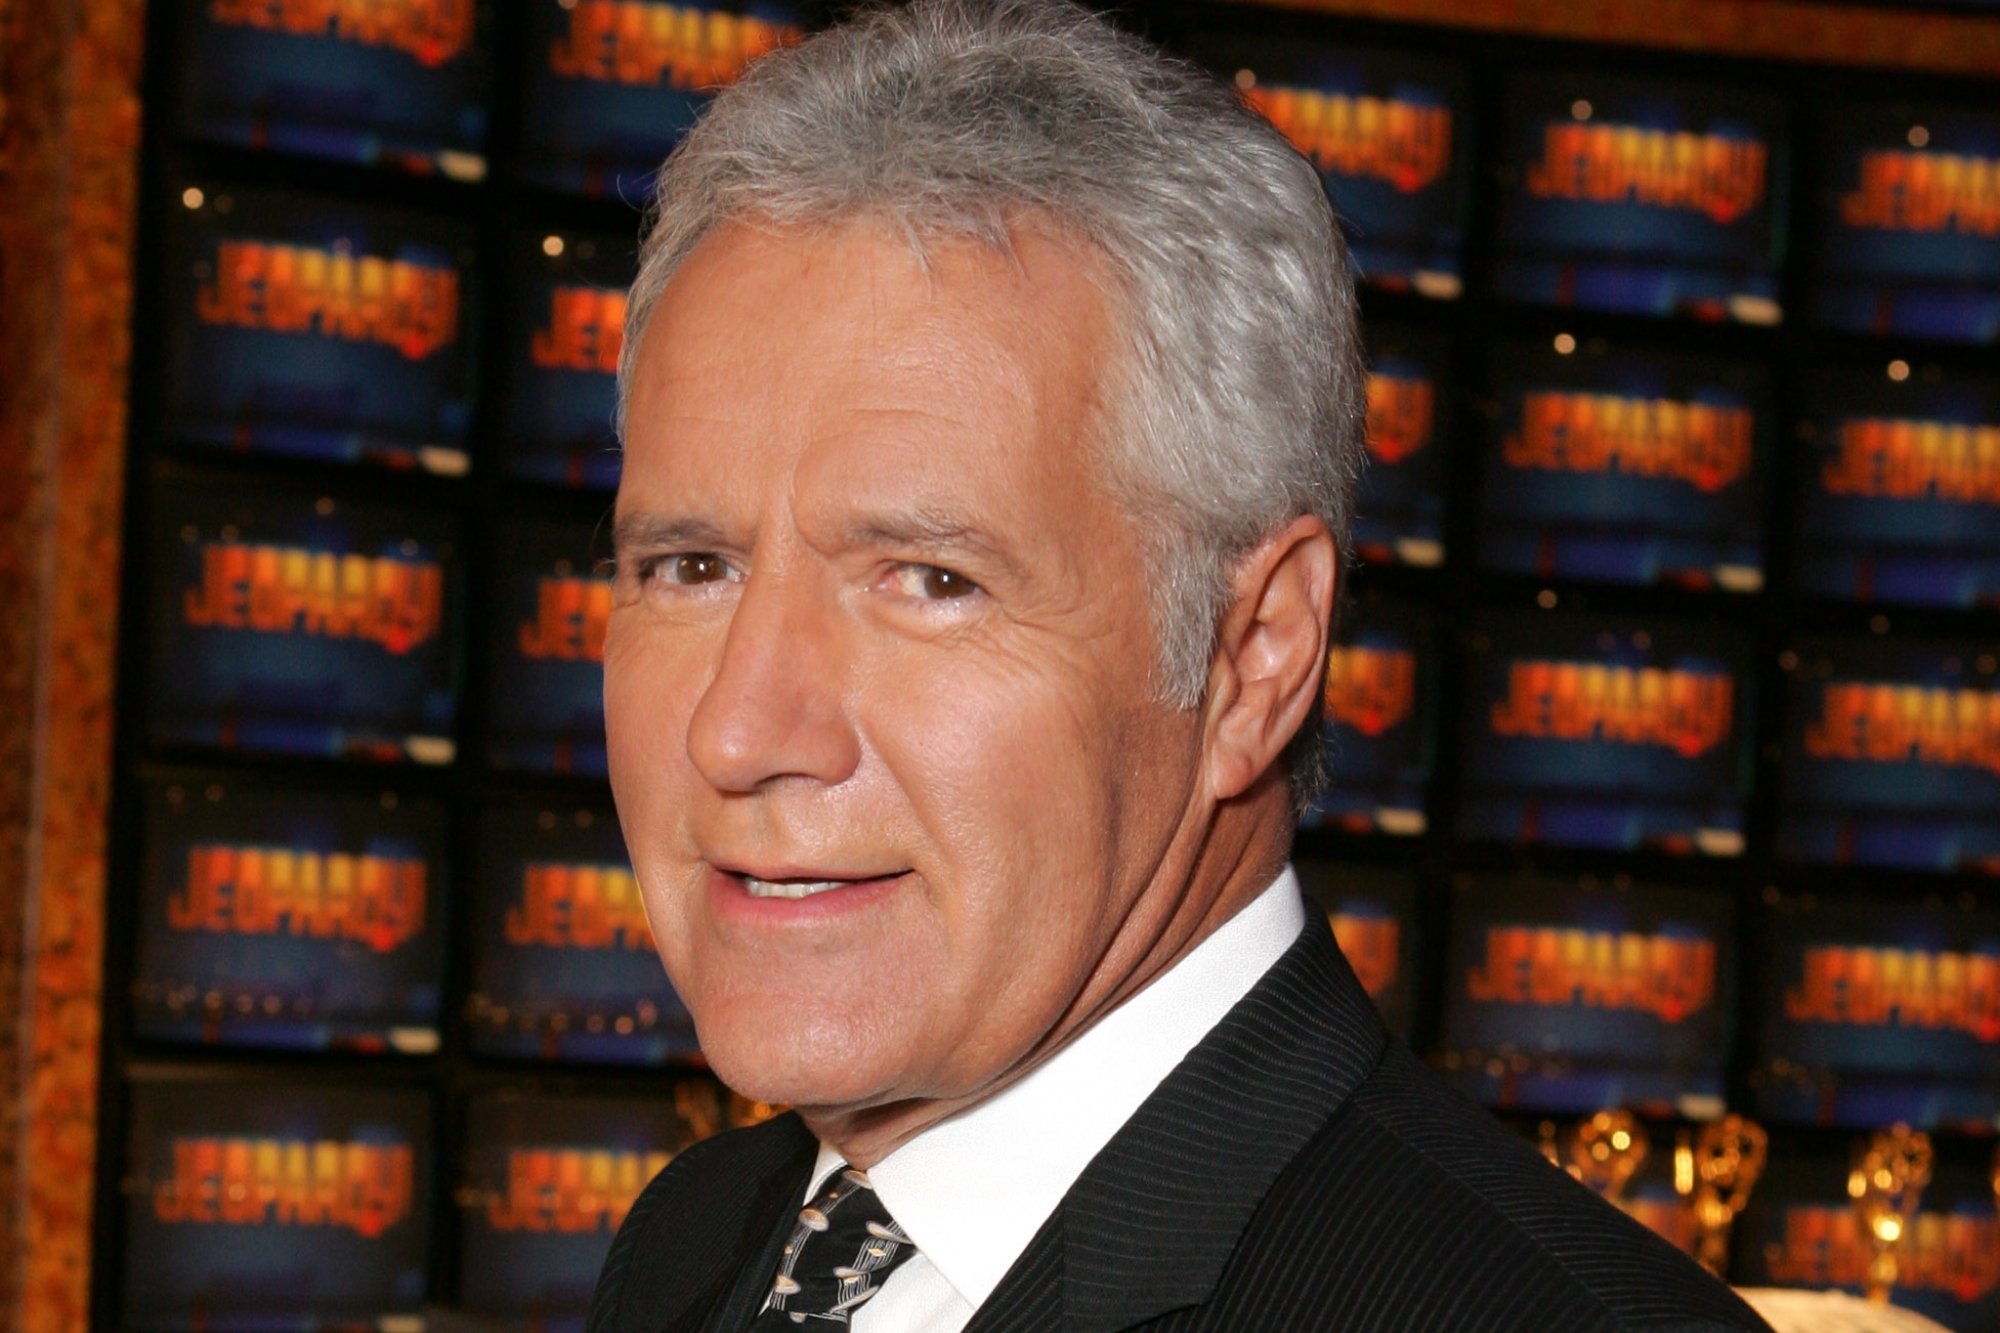 'Jeopardy!' host Alex Trebek who spoke with guests. He's wearing a dark suit jacket with a white collared-shirt underneath. He's standing in front of screens with the show's logo on them.